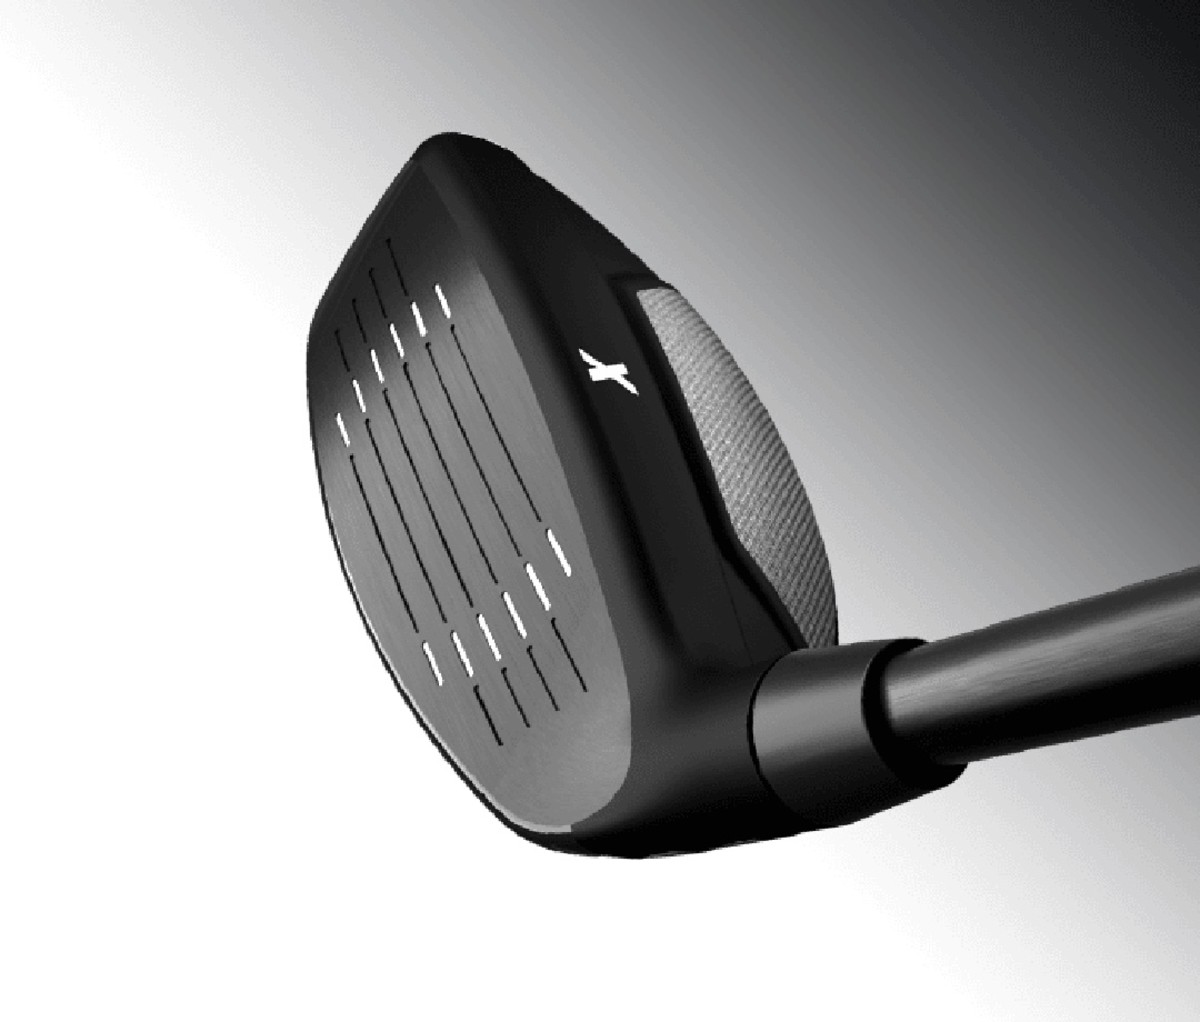 PXG Gen 4 fairway and hybrid golf clubs have three models to suit every player.